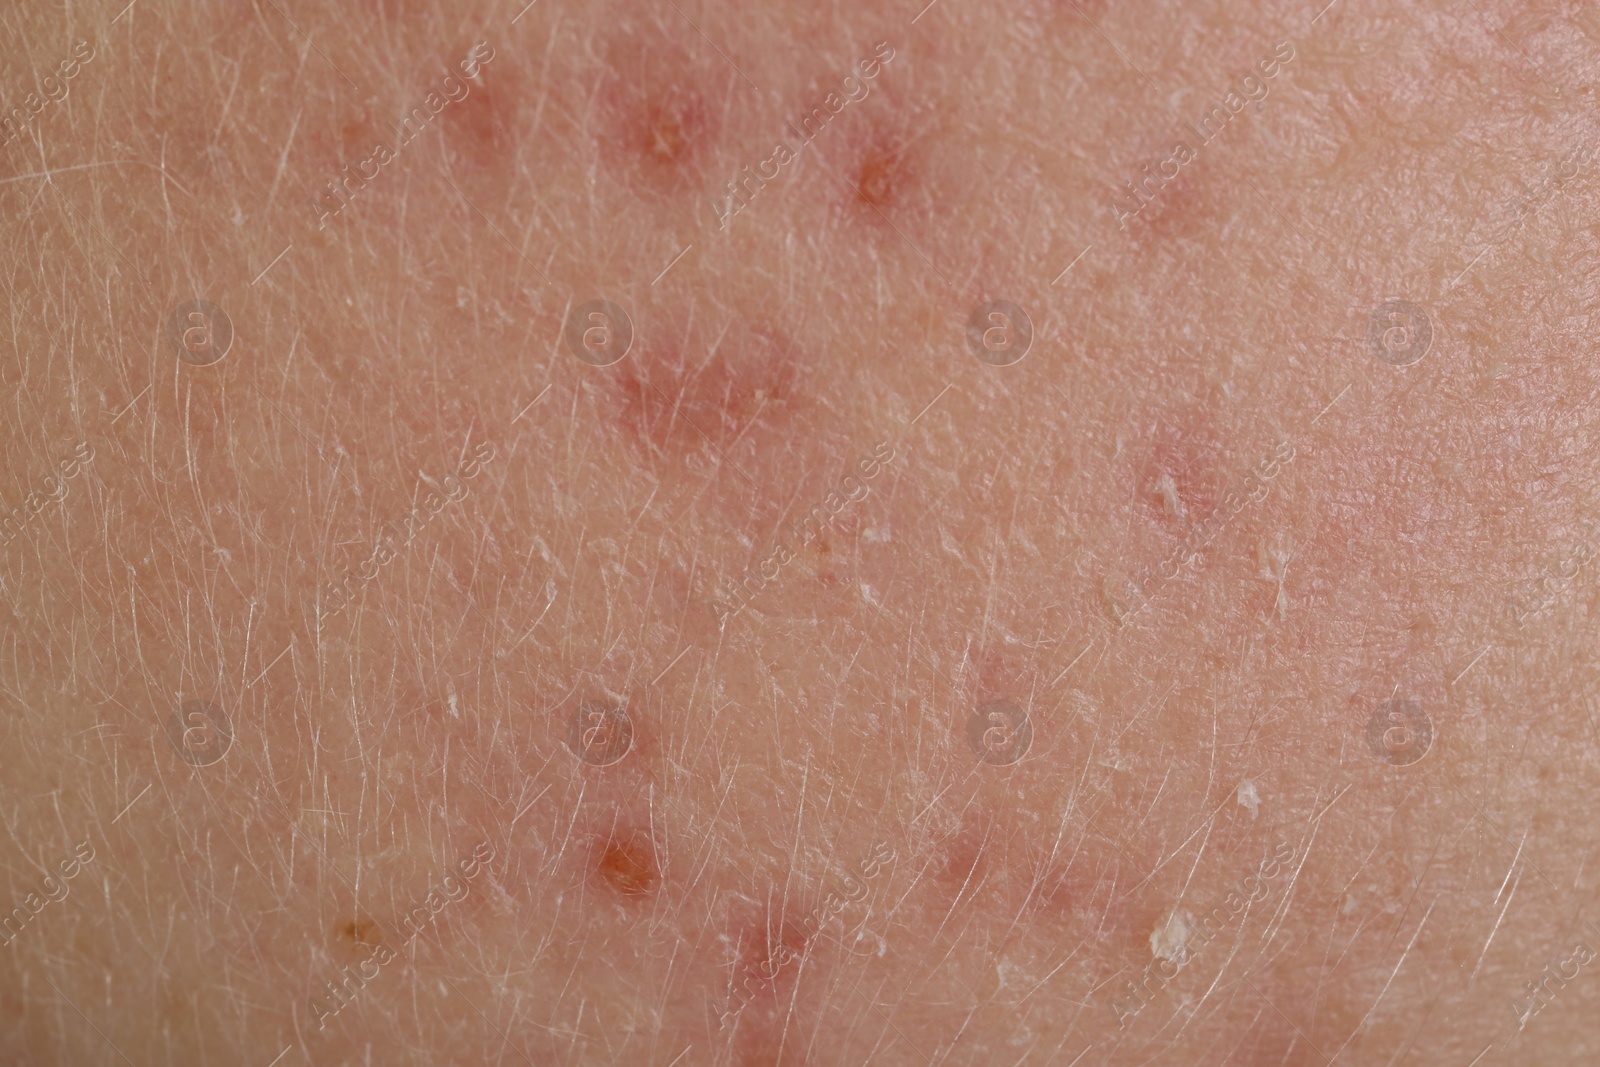 Photo of Texture of skin with acne problem as background, macro view